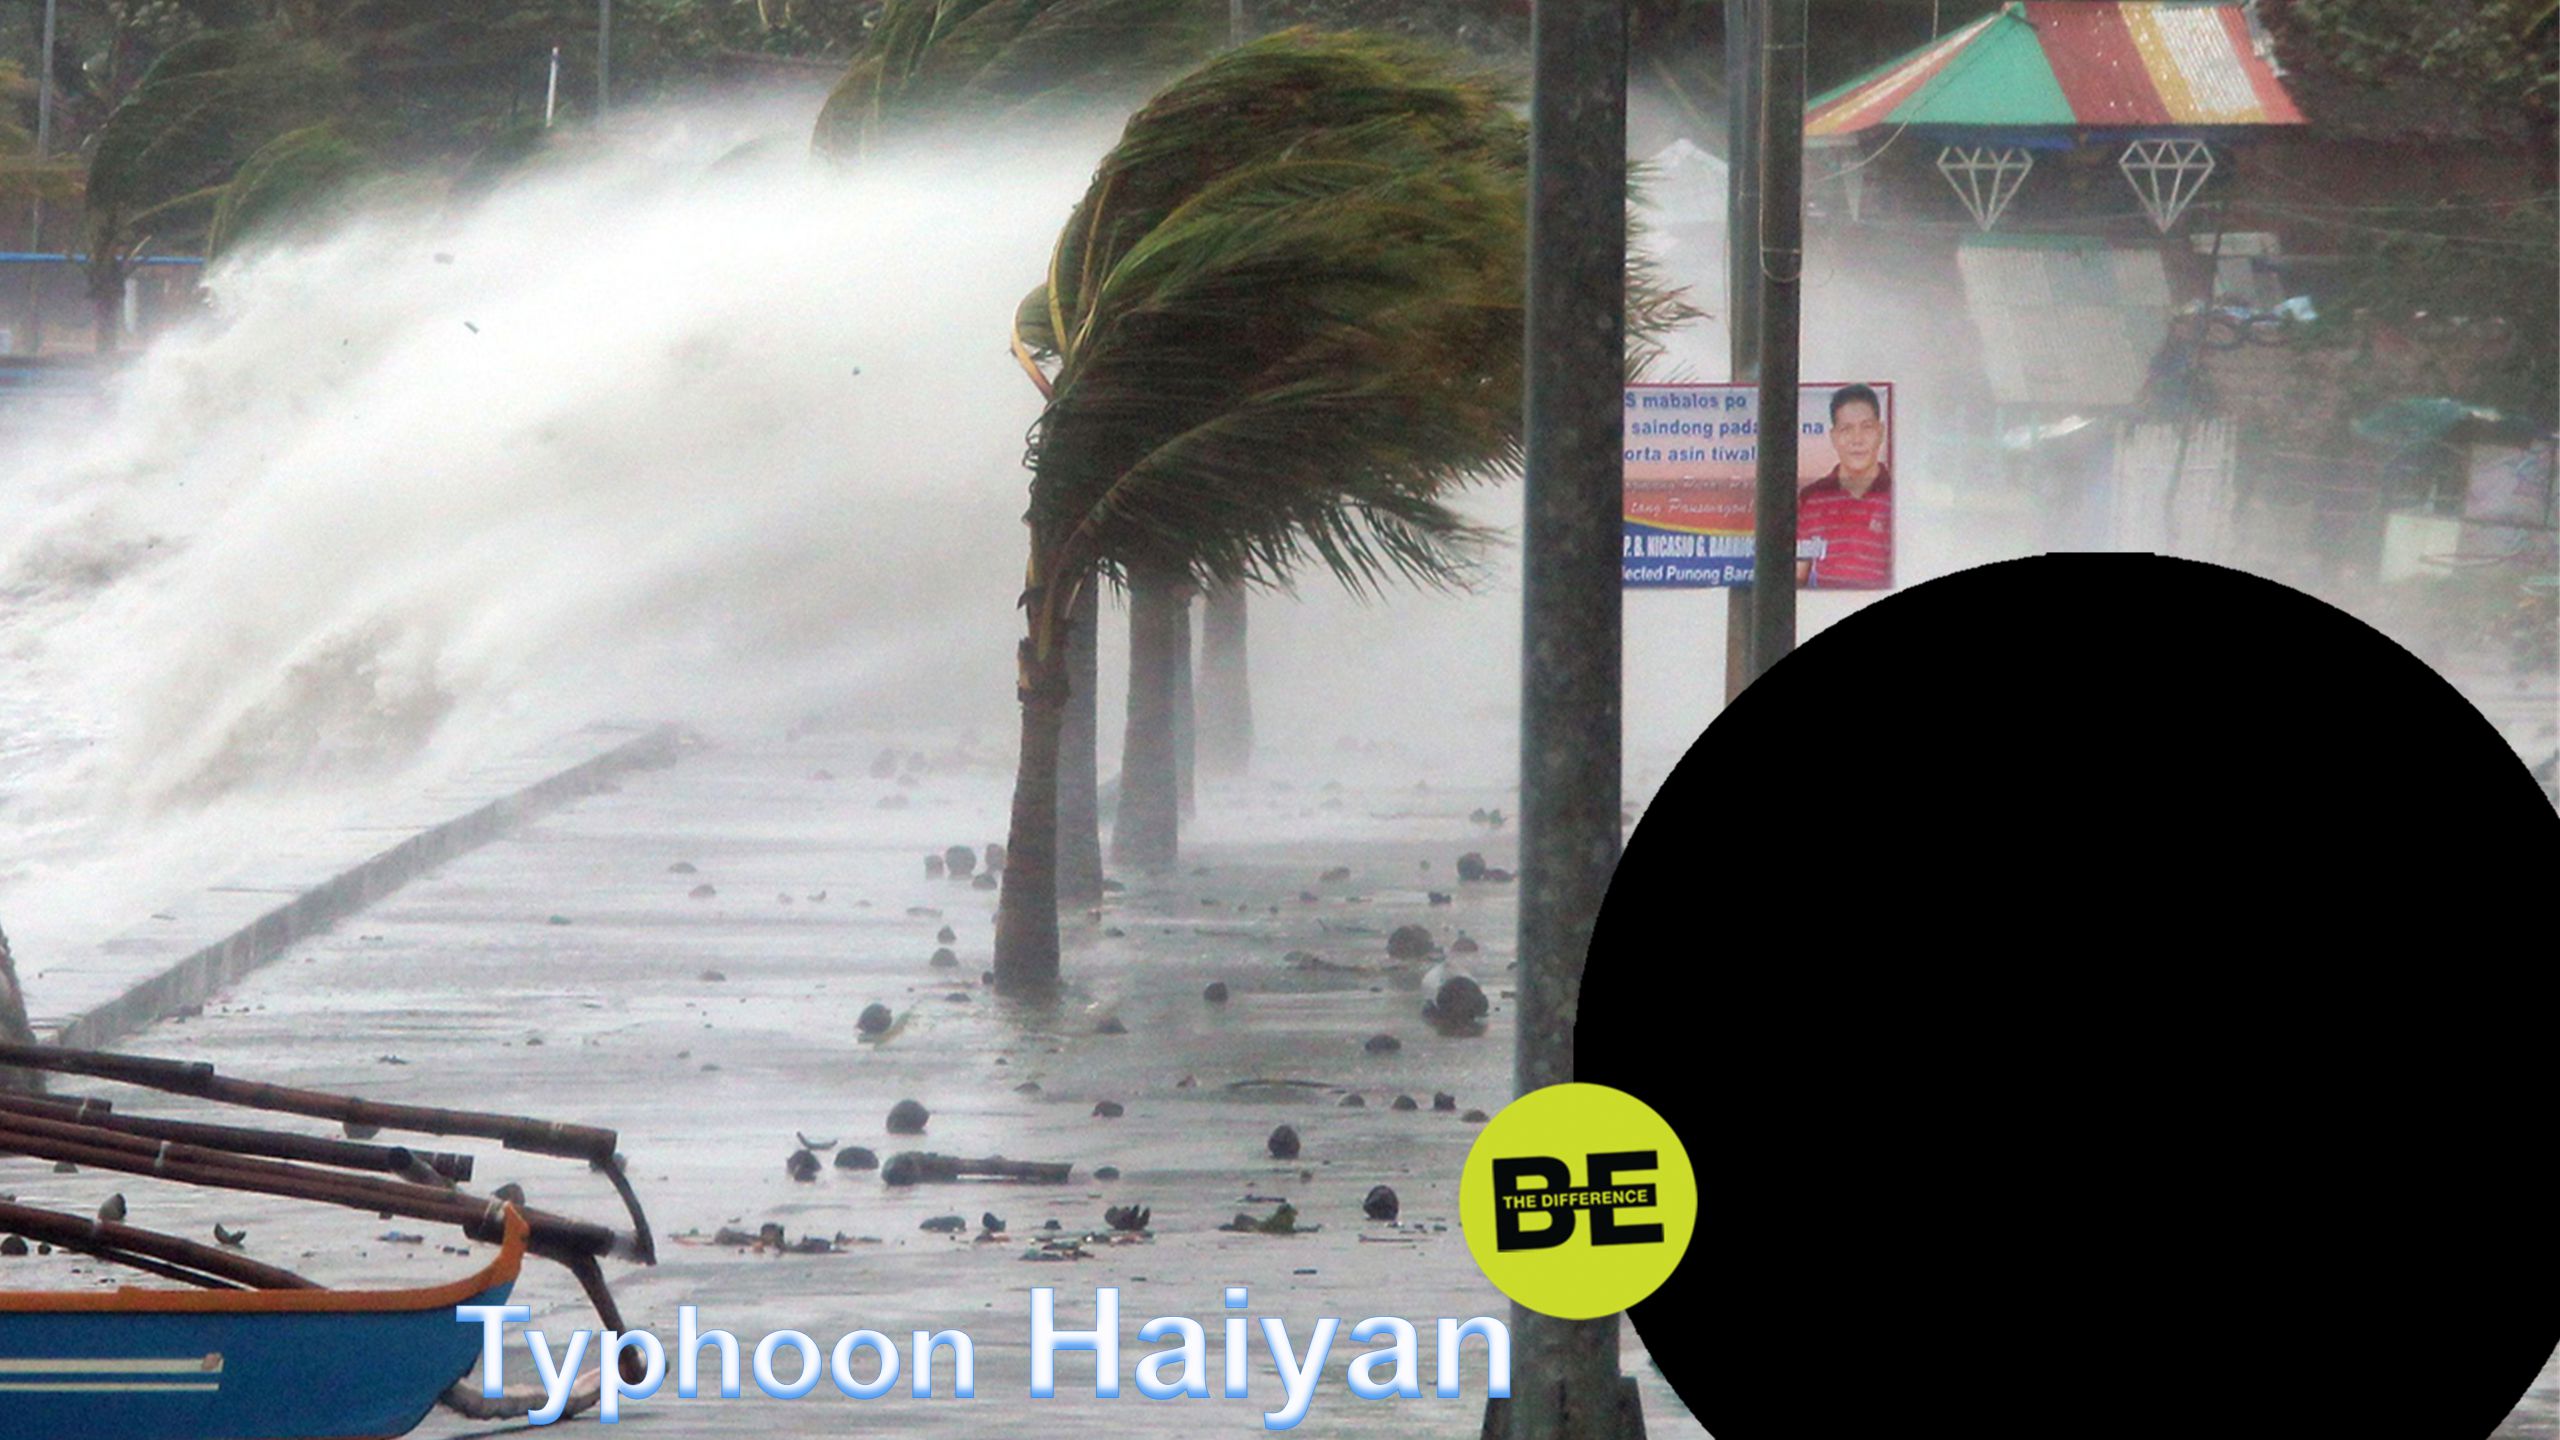 Example: Typhoon Haiyan that hit the Philippines on 7 November 2013